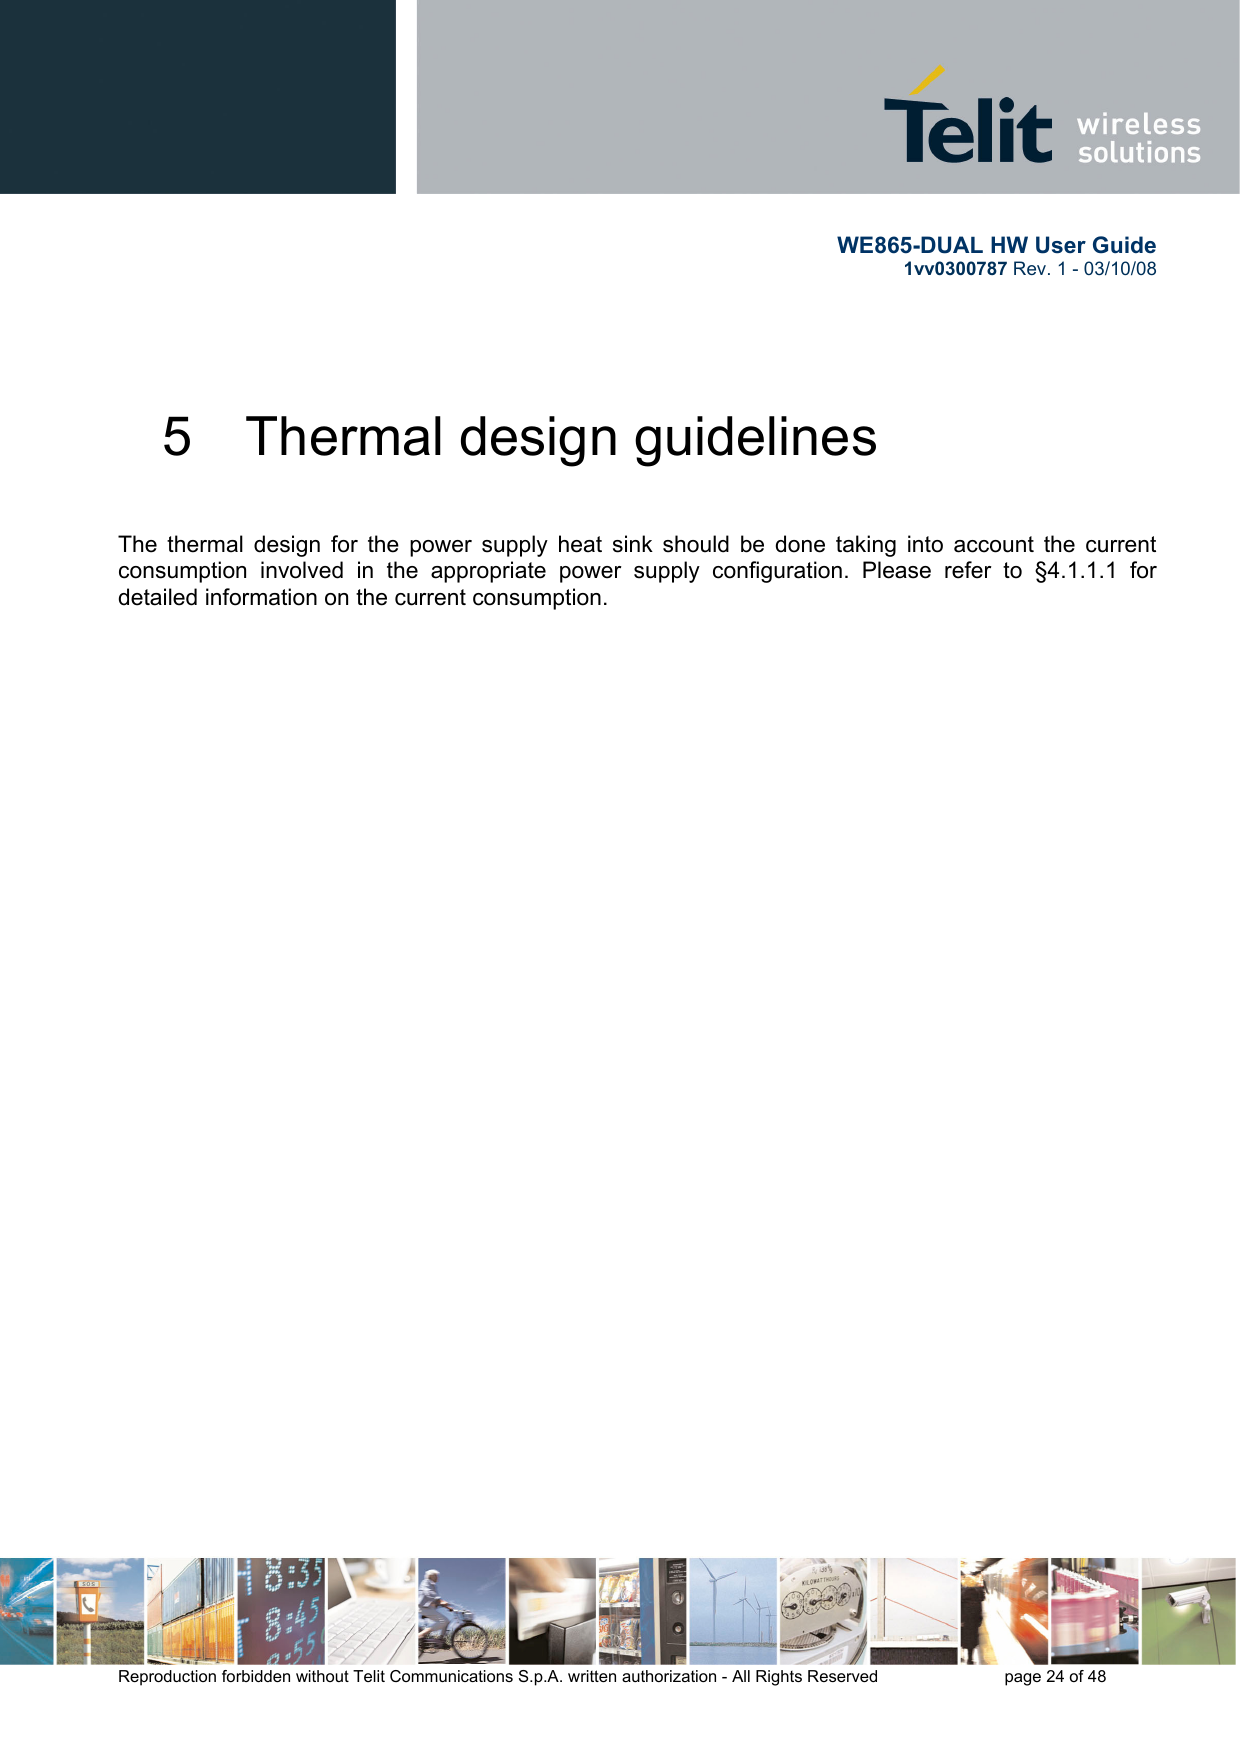       WE865-DUAL HW User Guide 1vv0300787 Rev. 1 - 03/10/08      Reproduction forbidden without Telit Communications S.p.A. written authorization - All Rights Reserved    page 24 of 48  5  Thermal design guidelines  The thermal design for the power supply heat sink should be done taking into account the current consumption involved in the appropriate power supply configuration. Please refer to §4.1.1.1 for detailed information on the current consumption.  